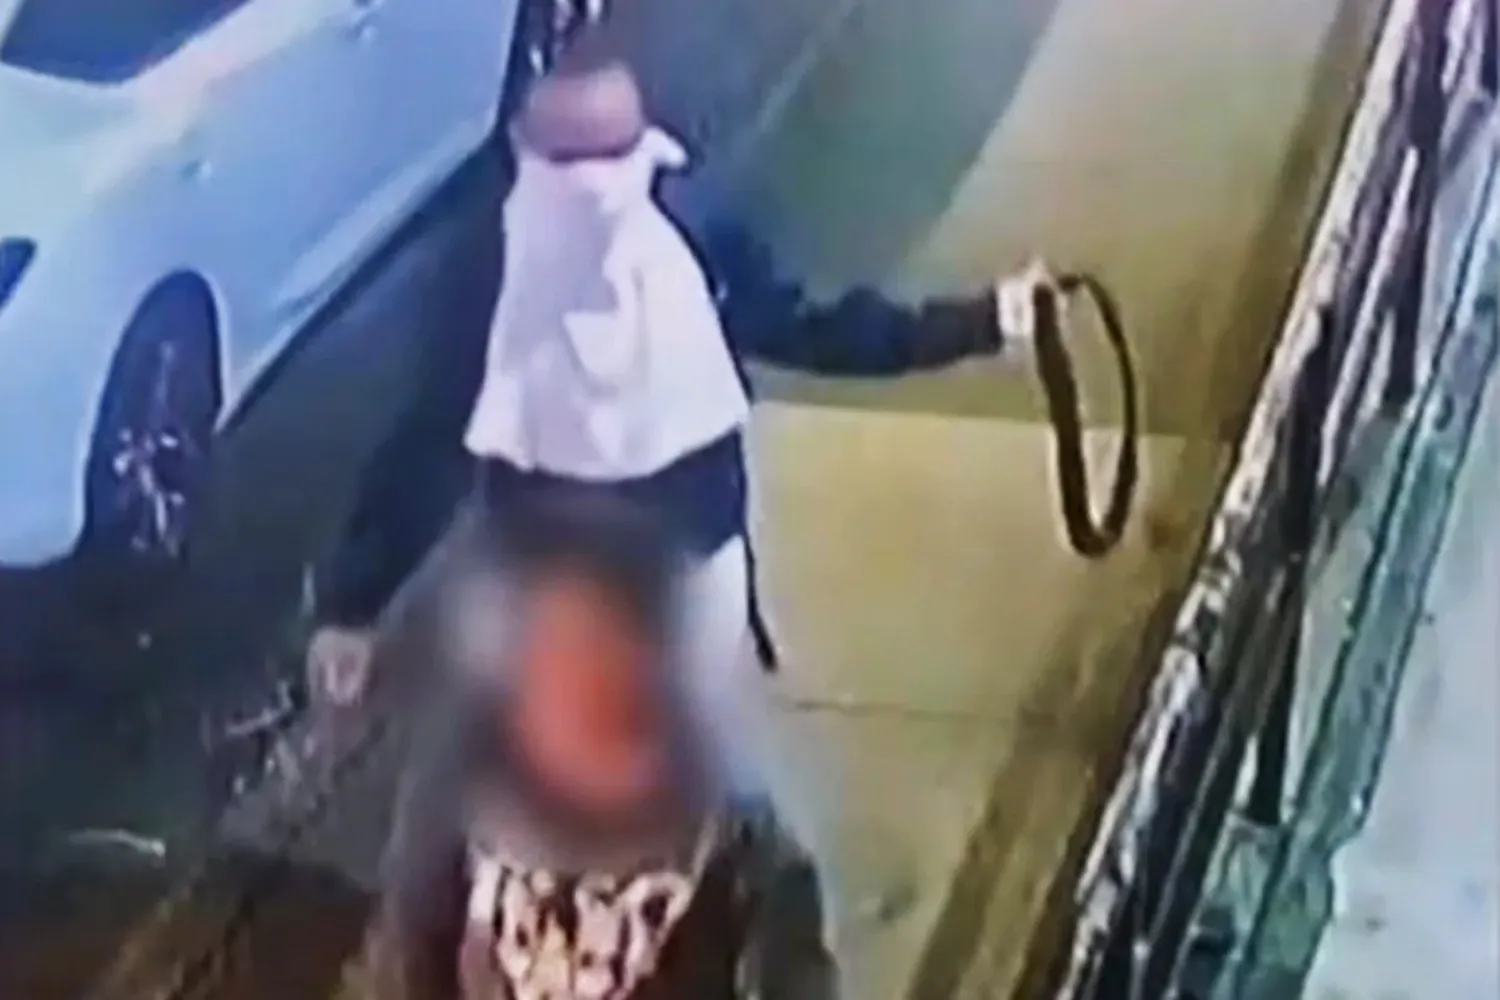 A man throws a belt around woman's neck before sexually assaulting her in New York City.